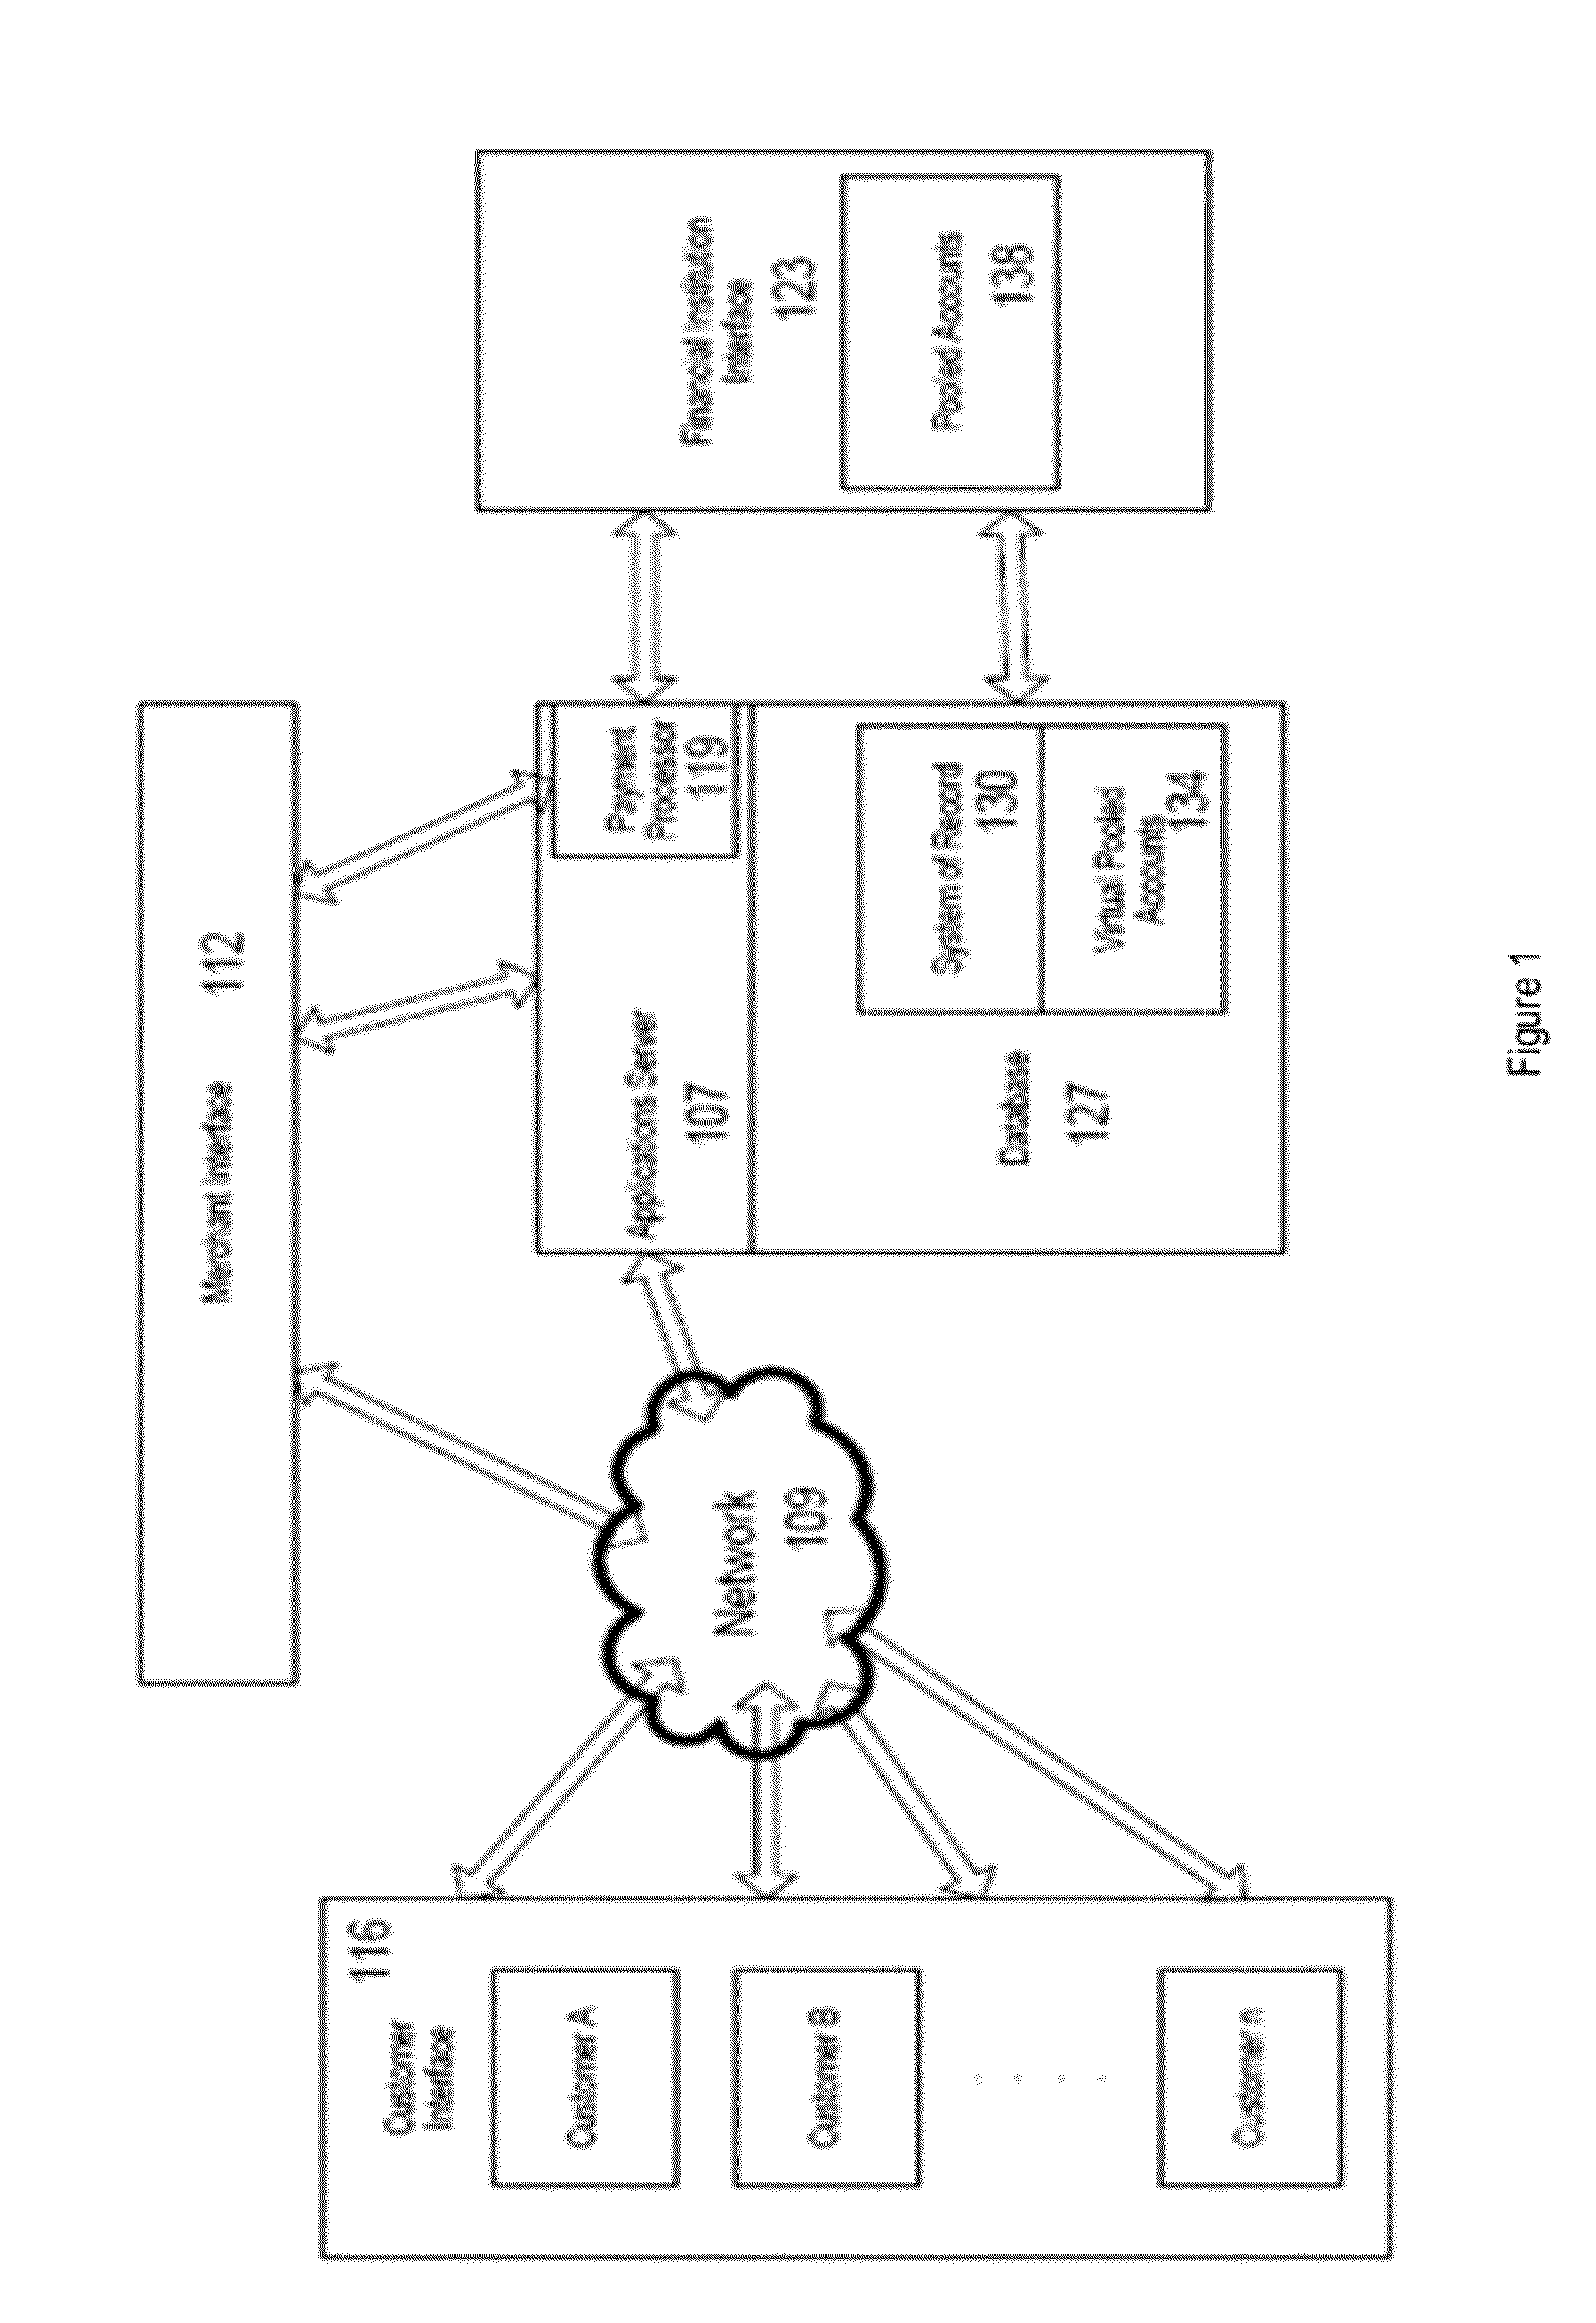 Method & System for Providing Payments Over A Wireless Connection